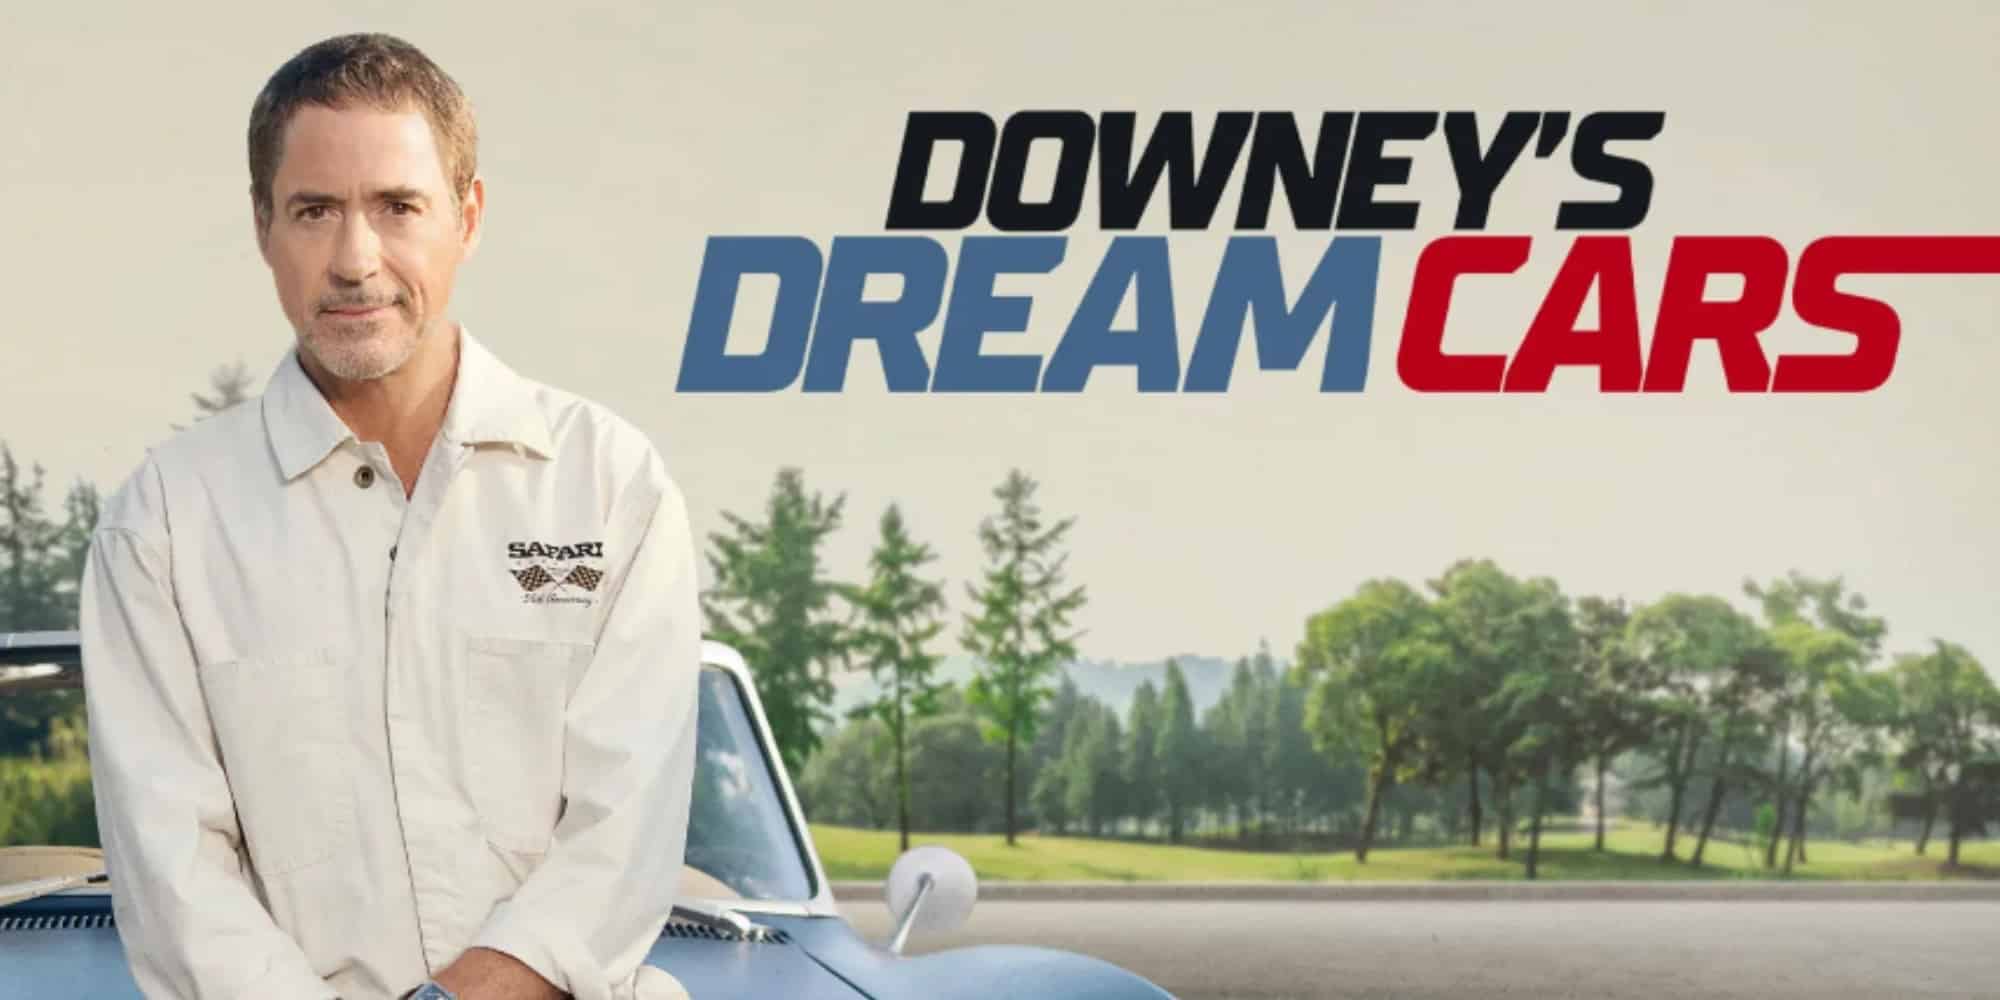 How To Watch Downey's Dream Cars Episodes?